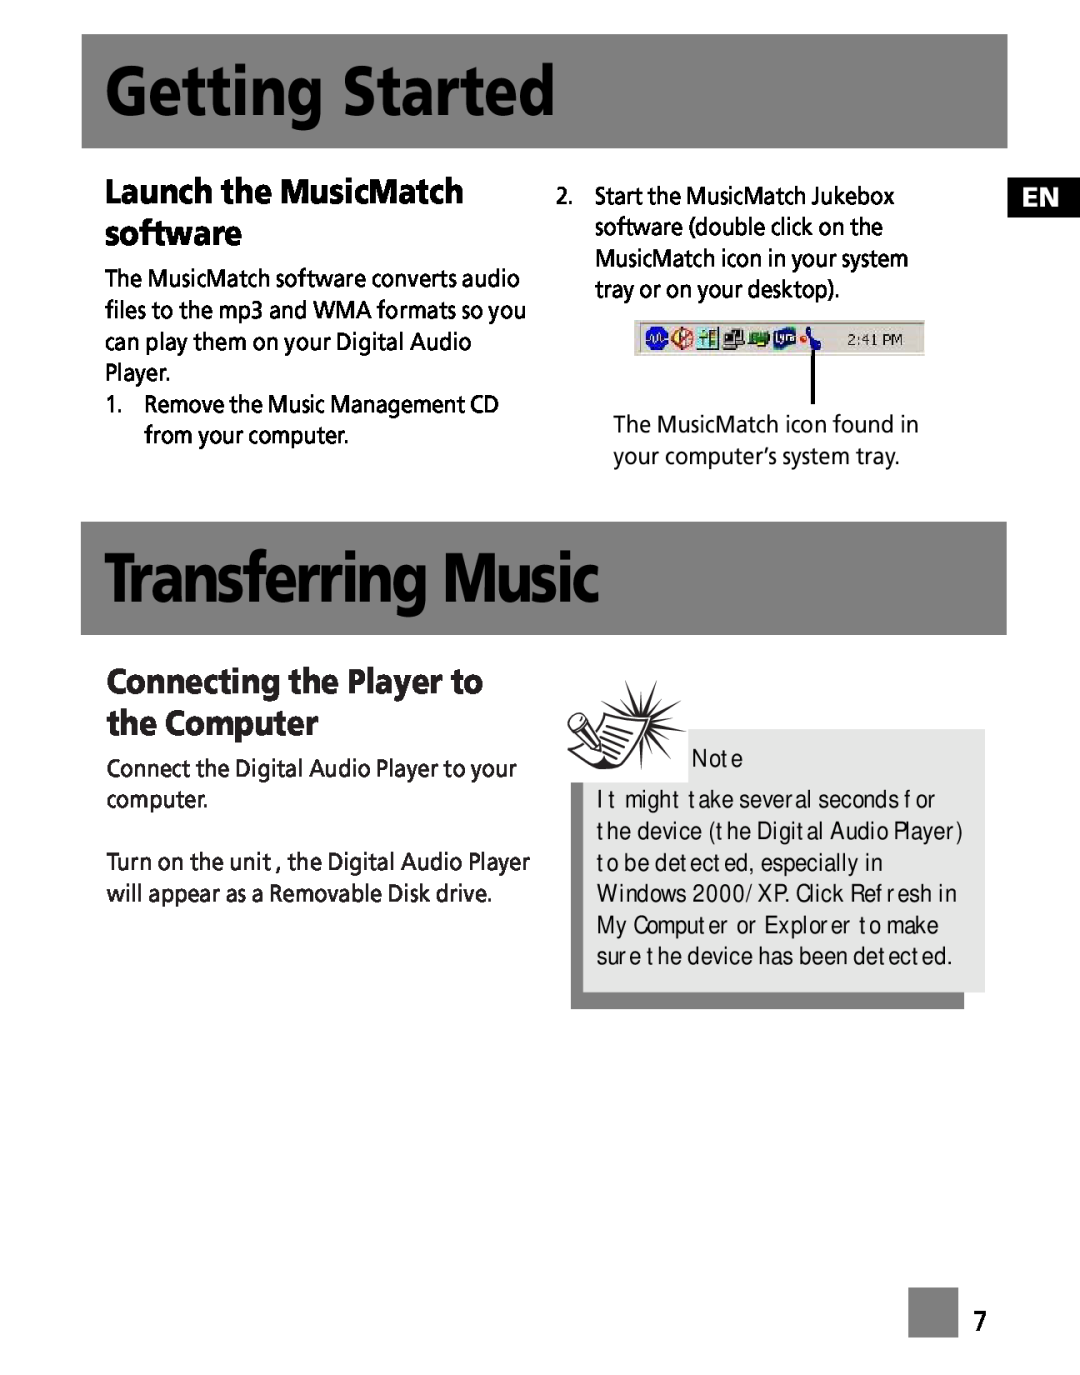 RCA M100256 Transferring Music, Launch the MusicMatch software, Getting Started, Connecting the Player to the Computer 